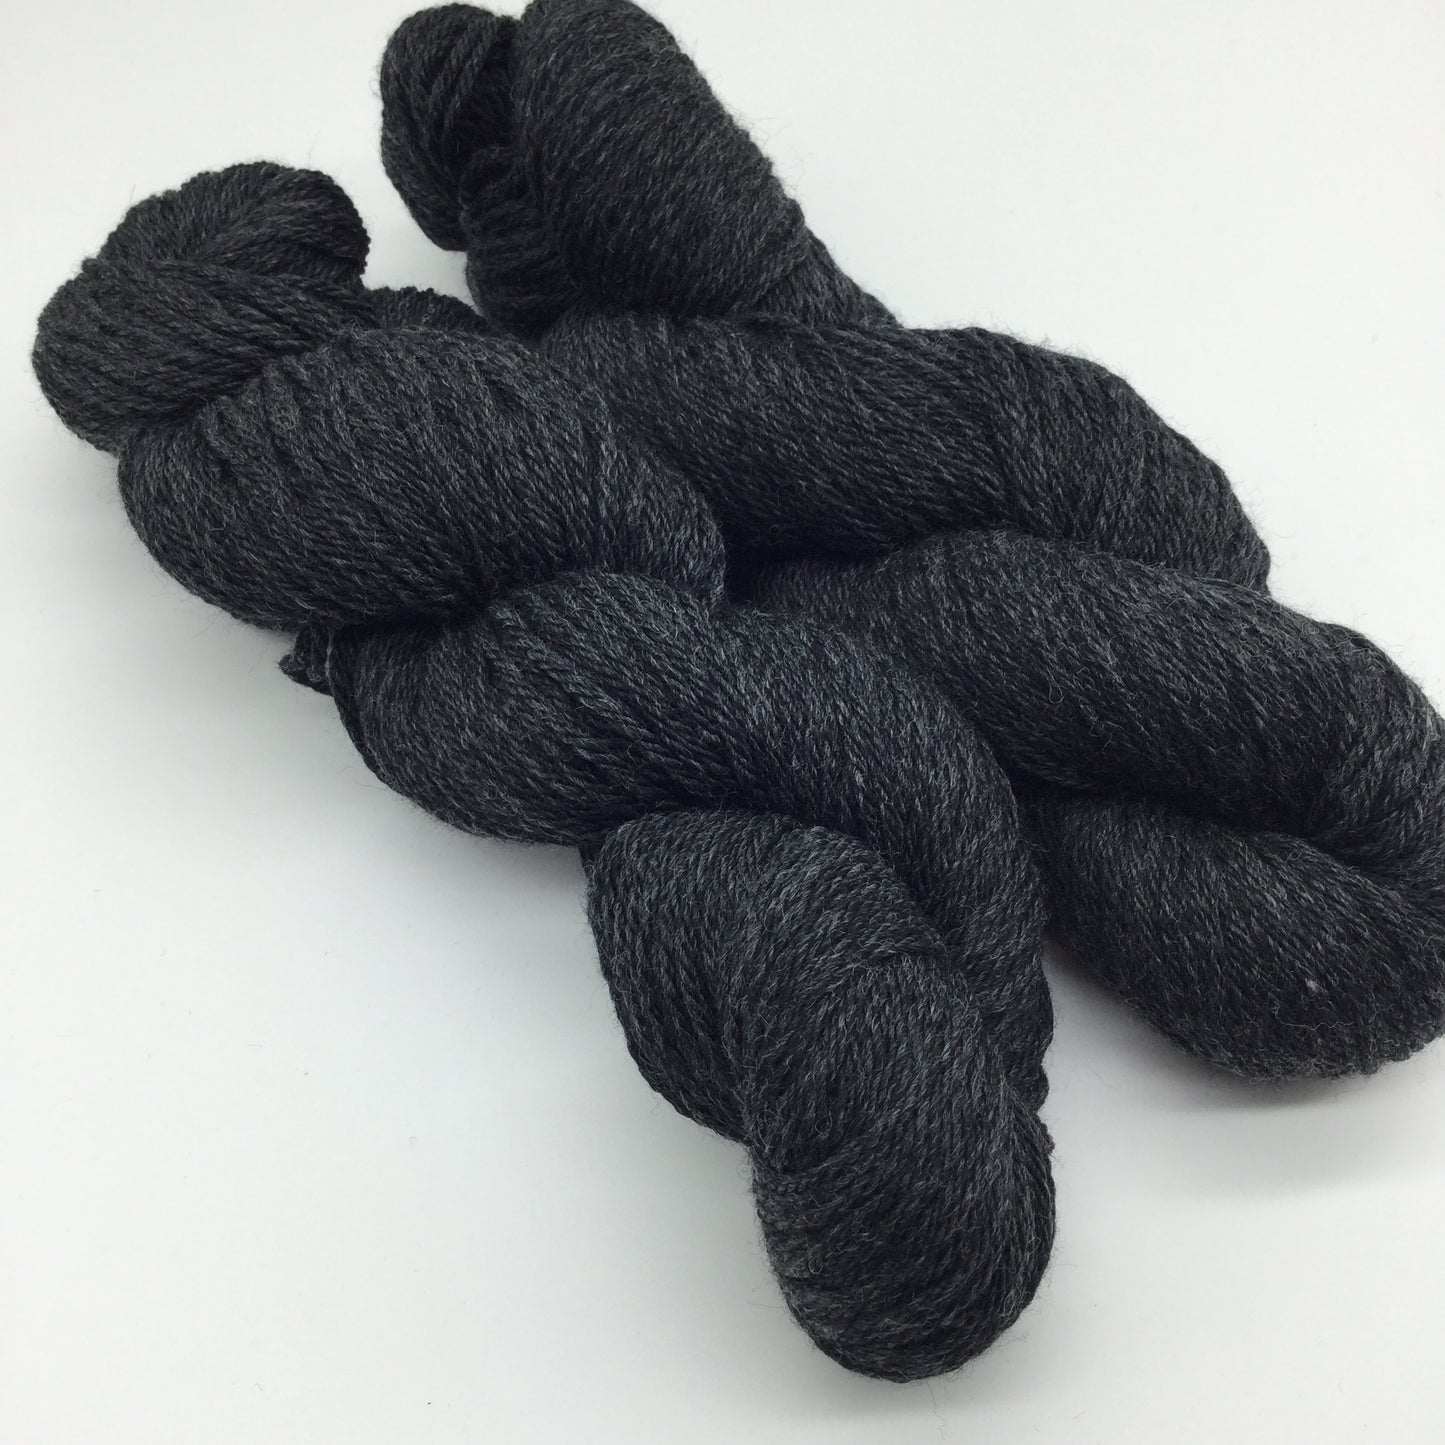 Falkland worsted "Charcoal"